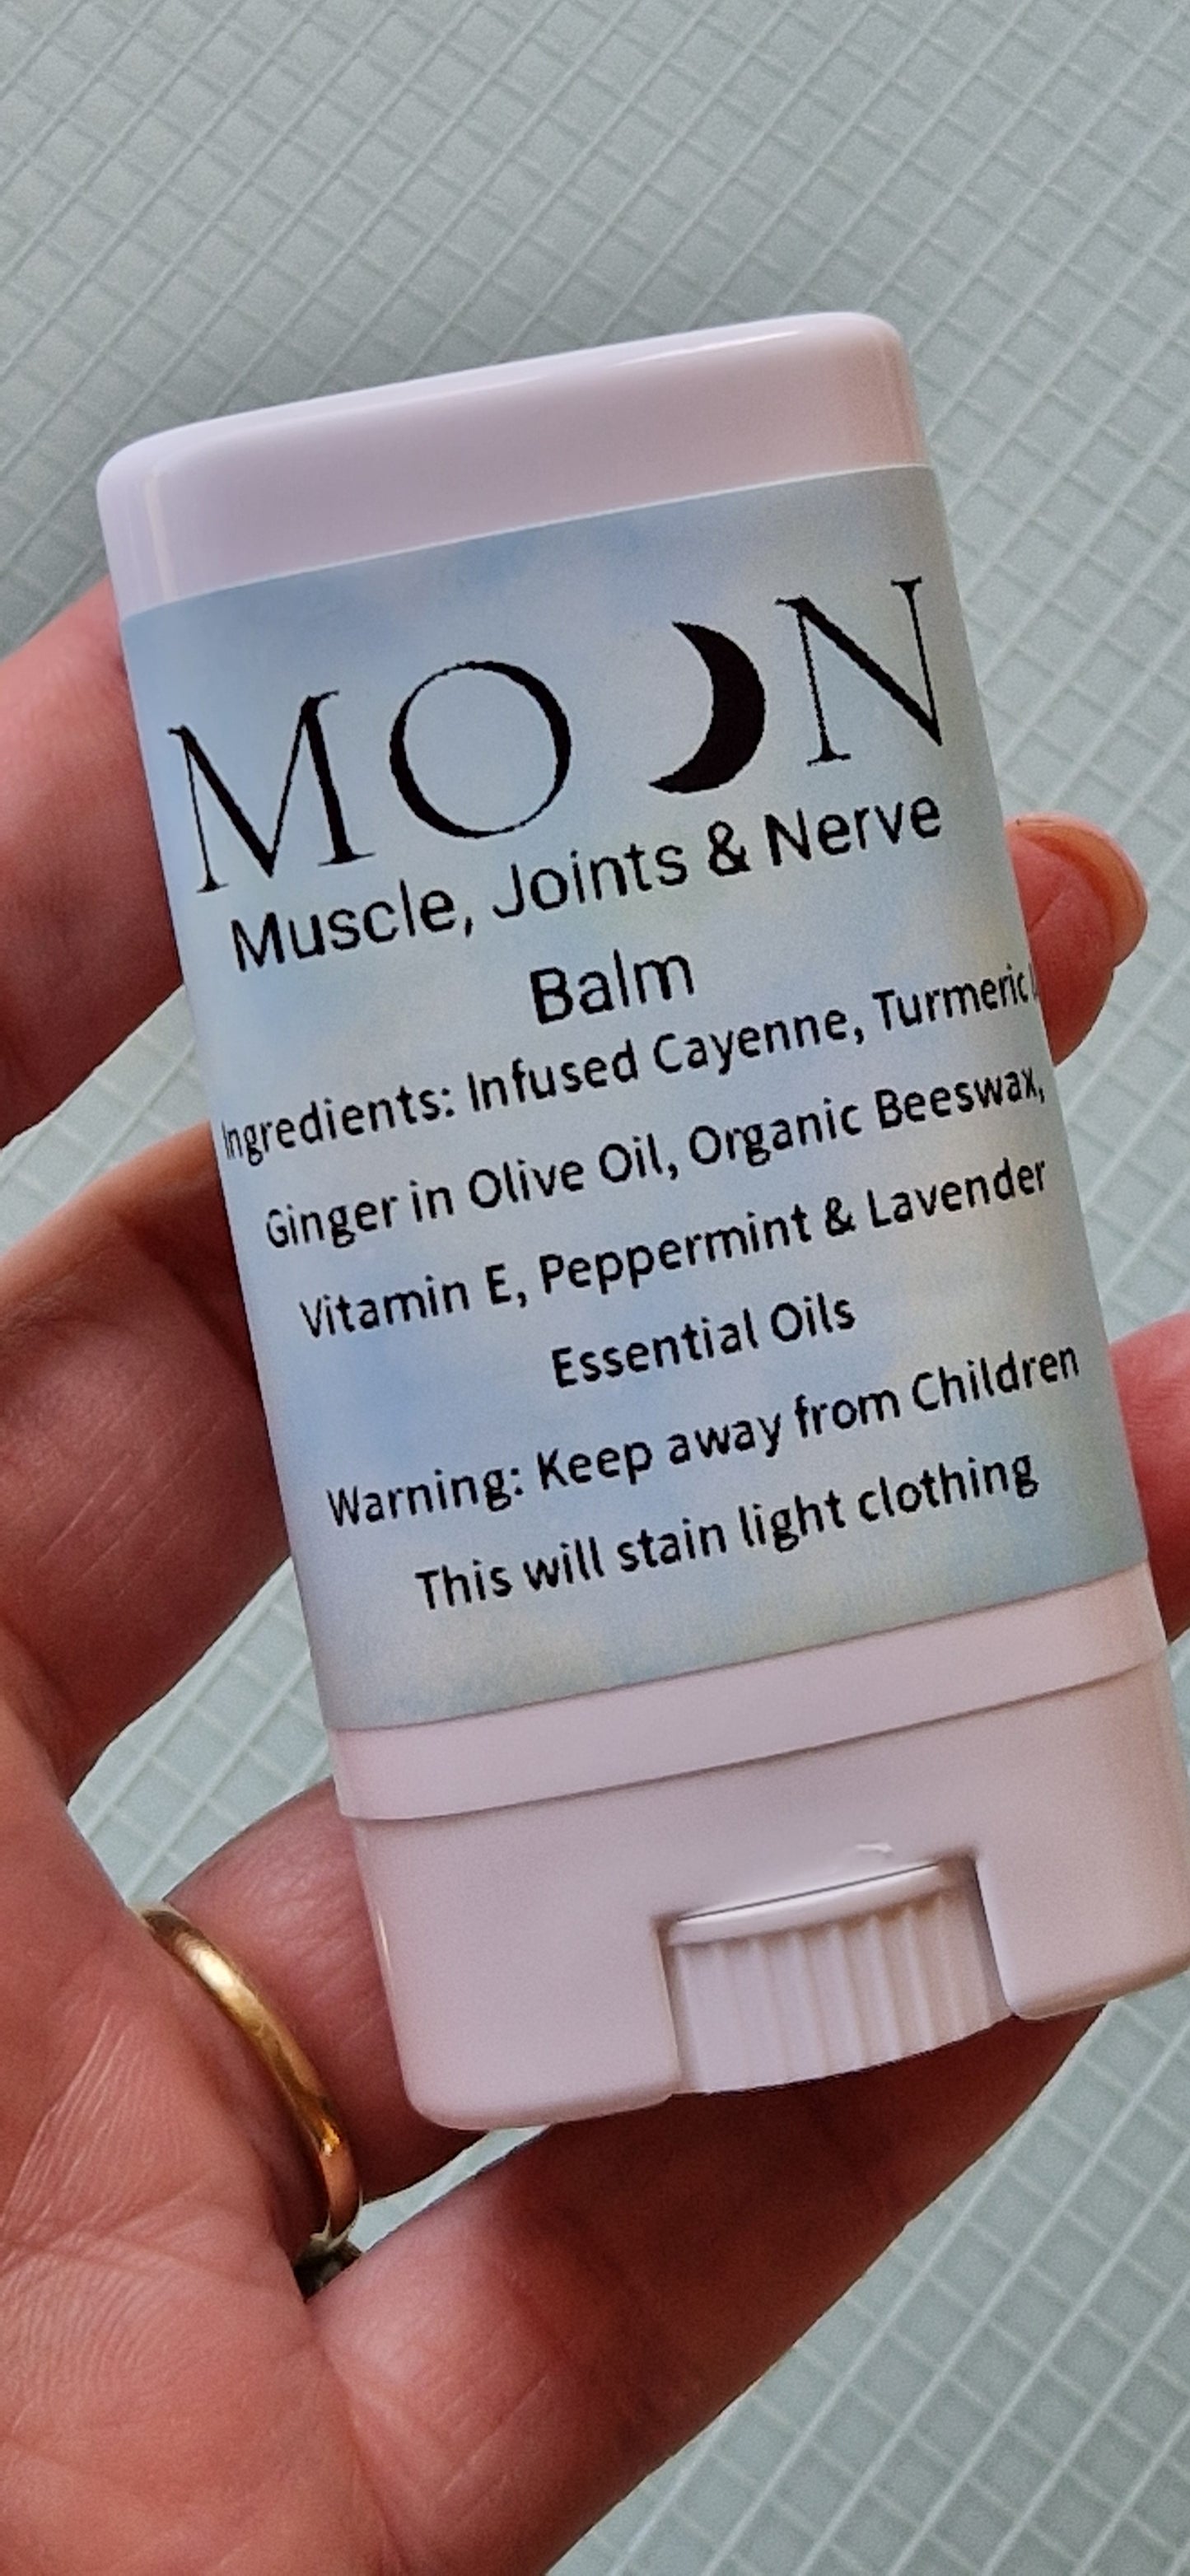 Muscle, Joints & Nerve Balm